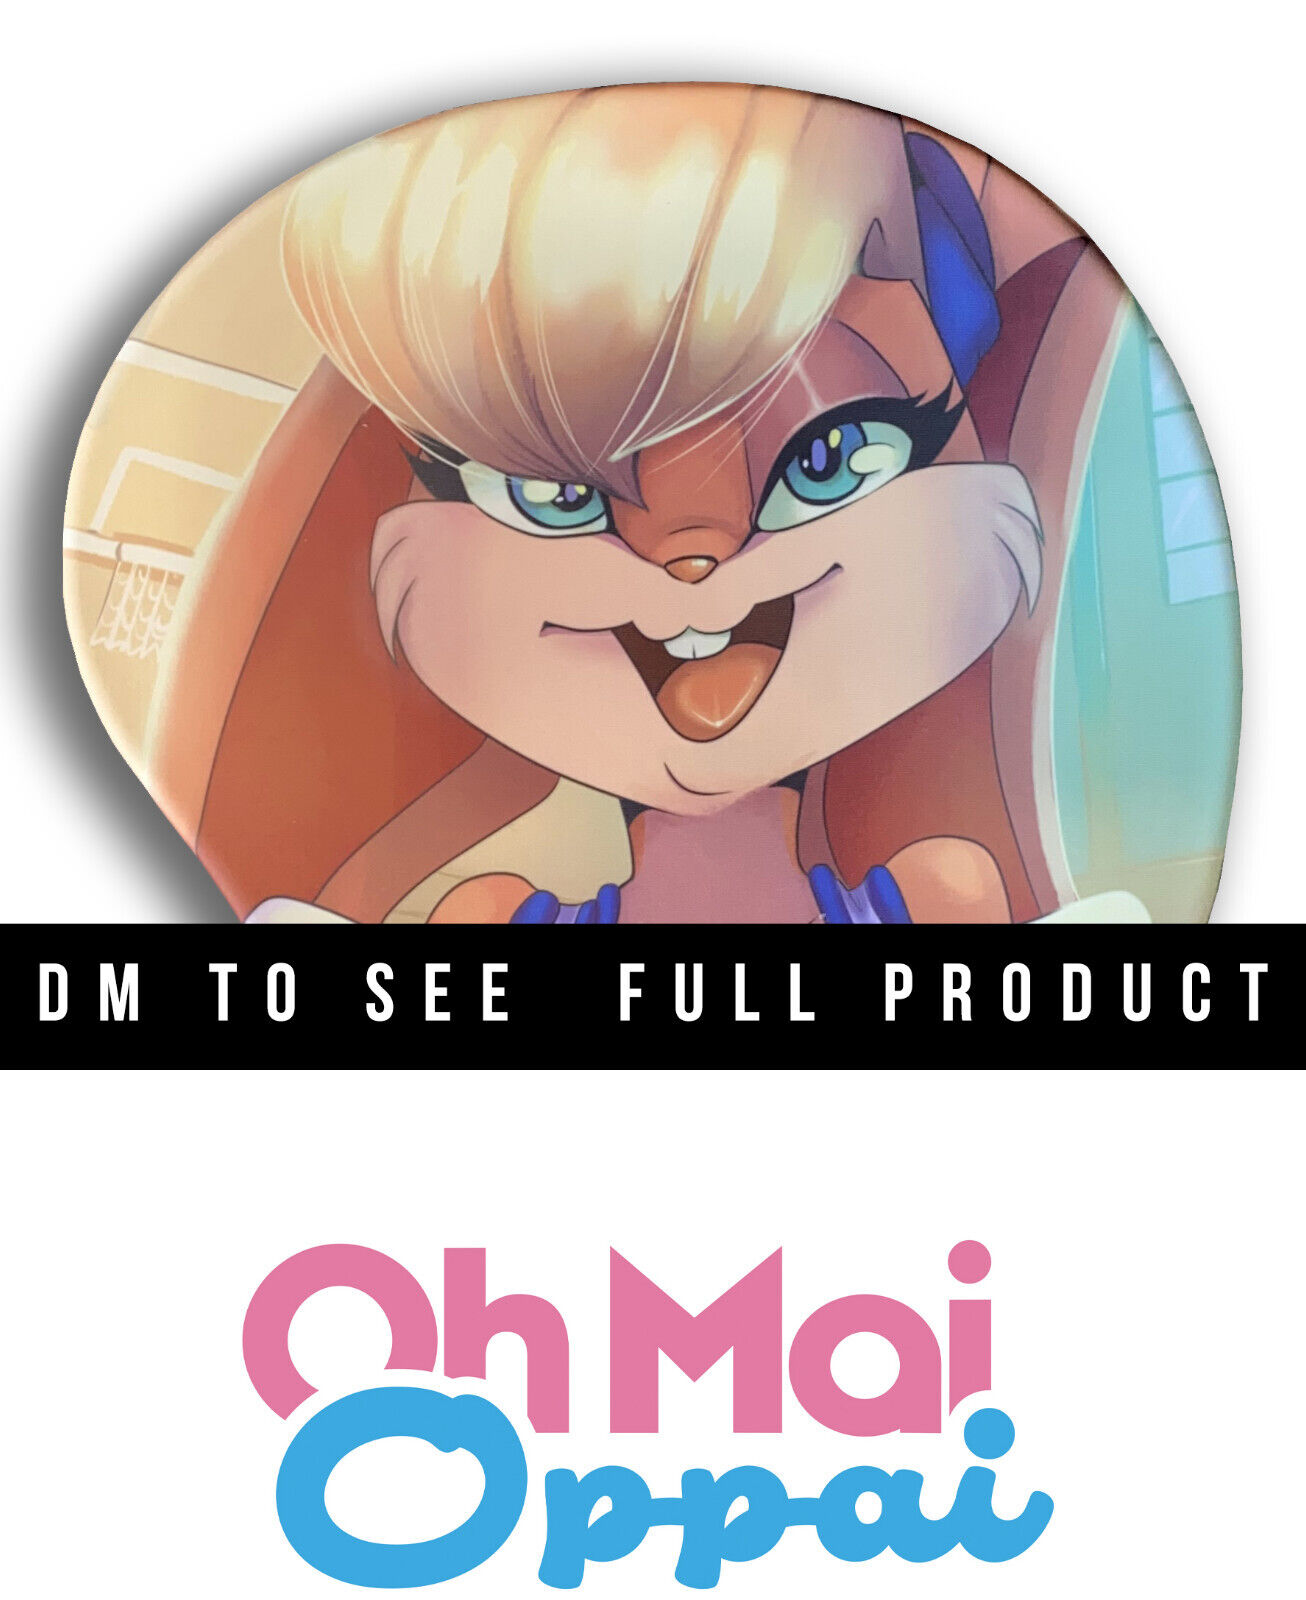 Lola Bunny from Space Jam Oppai Mousepad